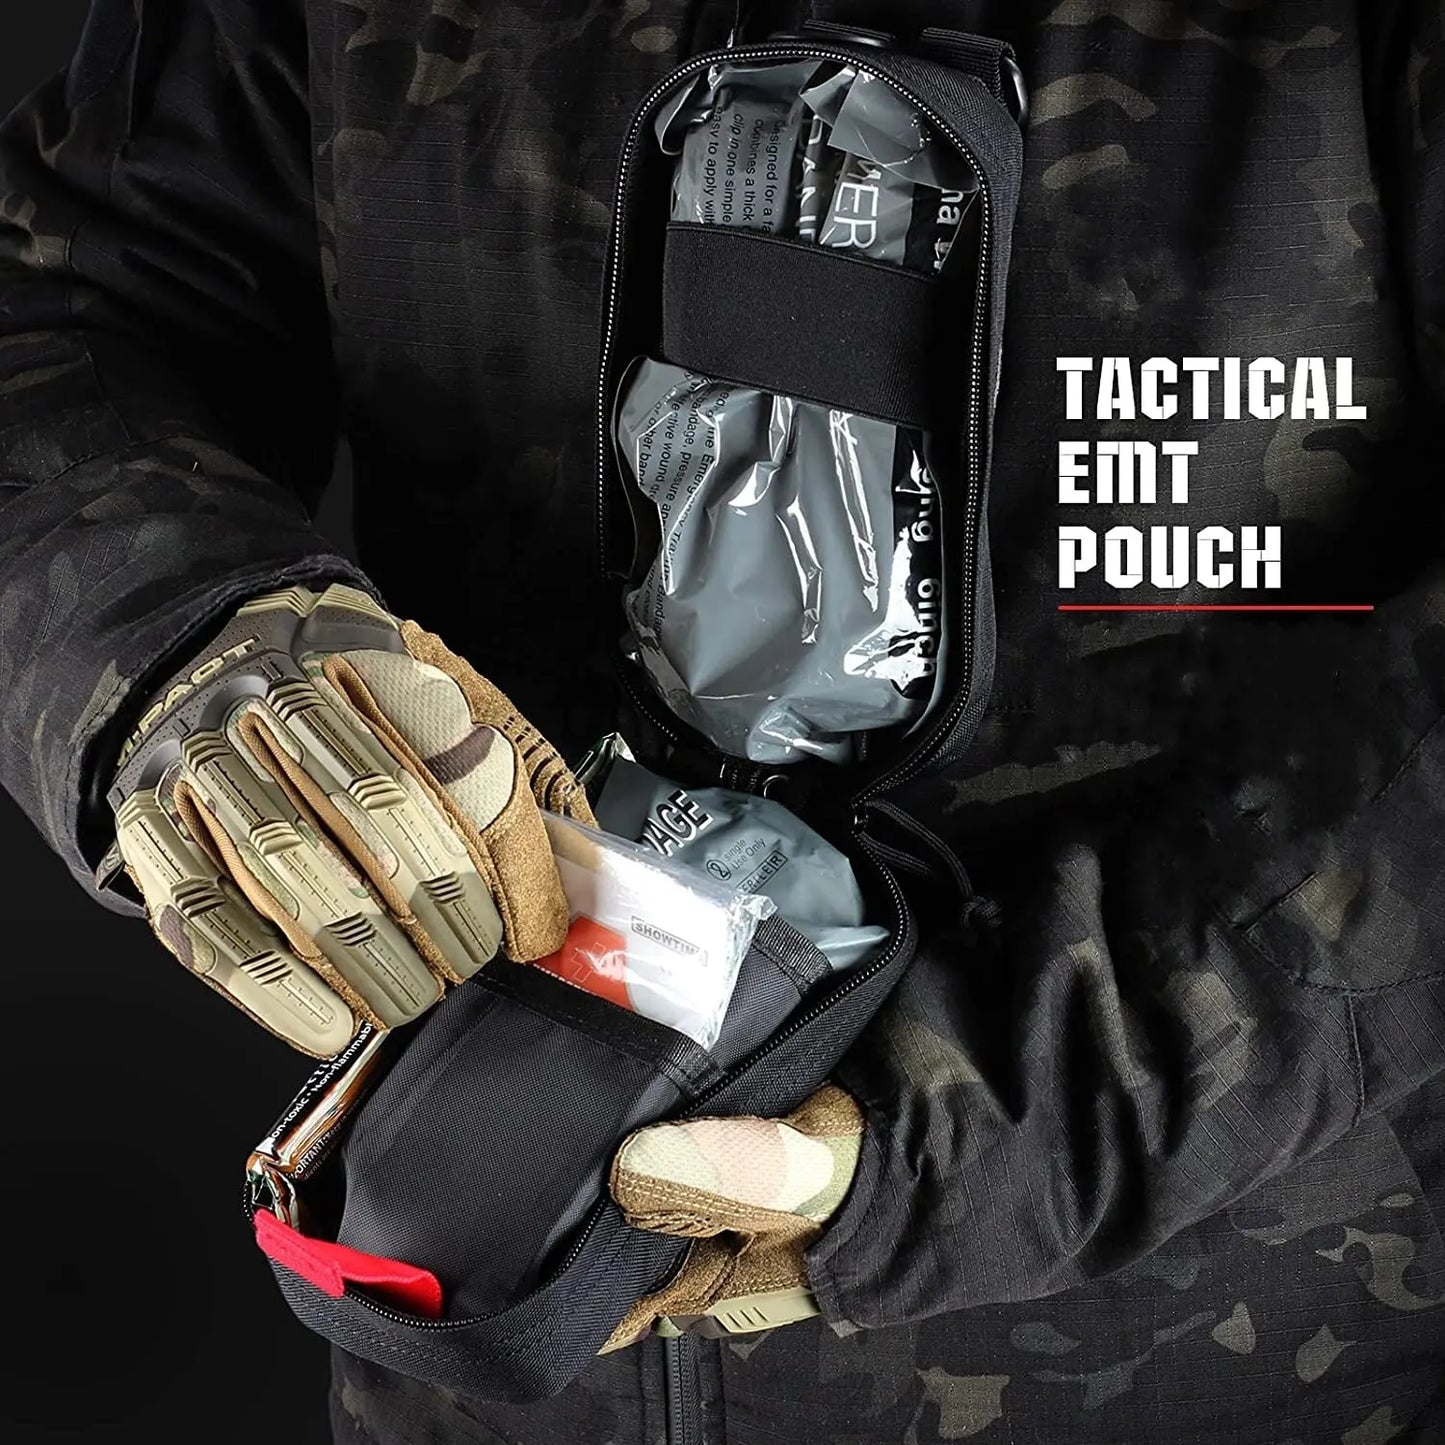 Tactical EMT First Aid Kit